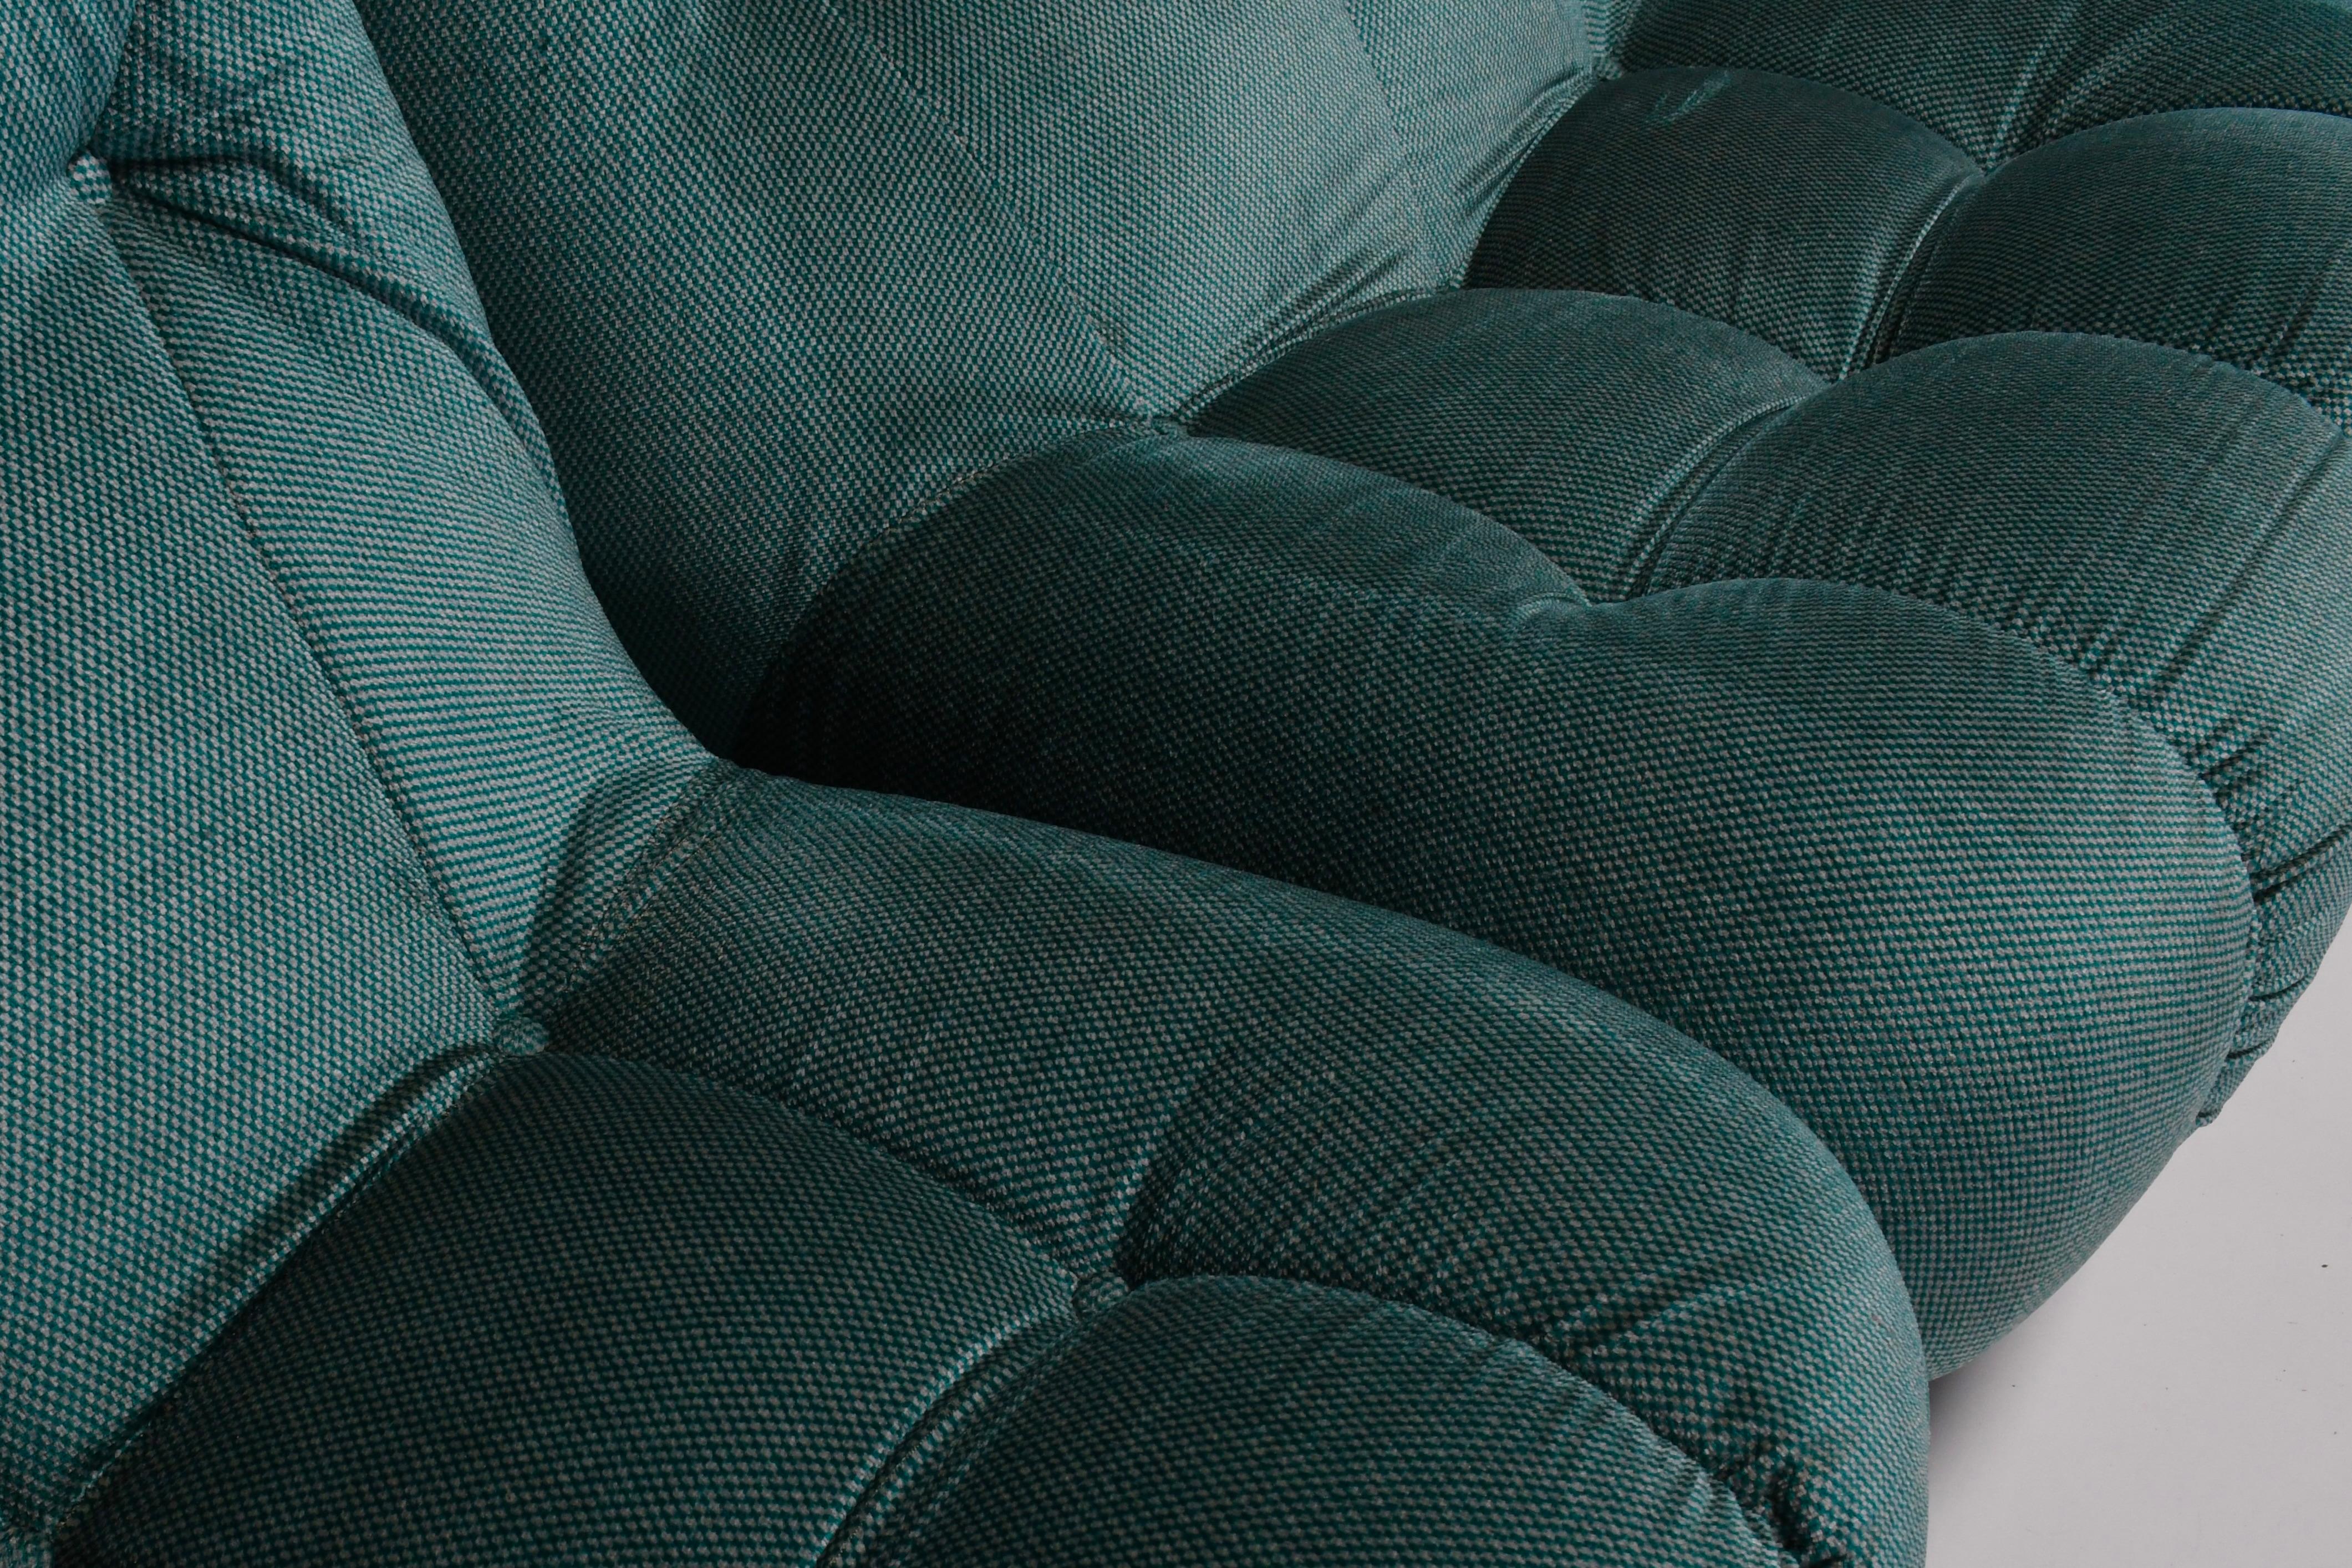 Large Modular Sectional ‘Nuvolone’ Sofa by Rino Maturi in Green Fabric, 1970s For Sale 7